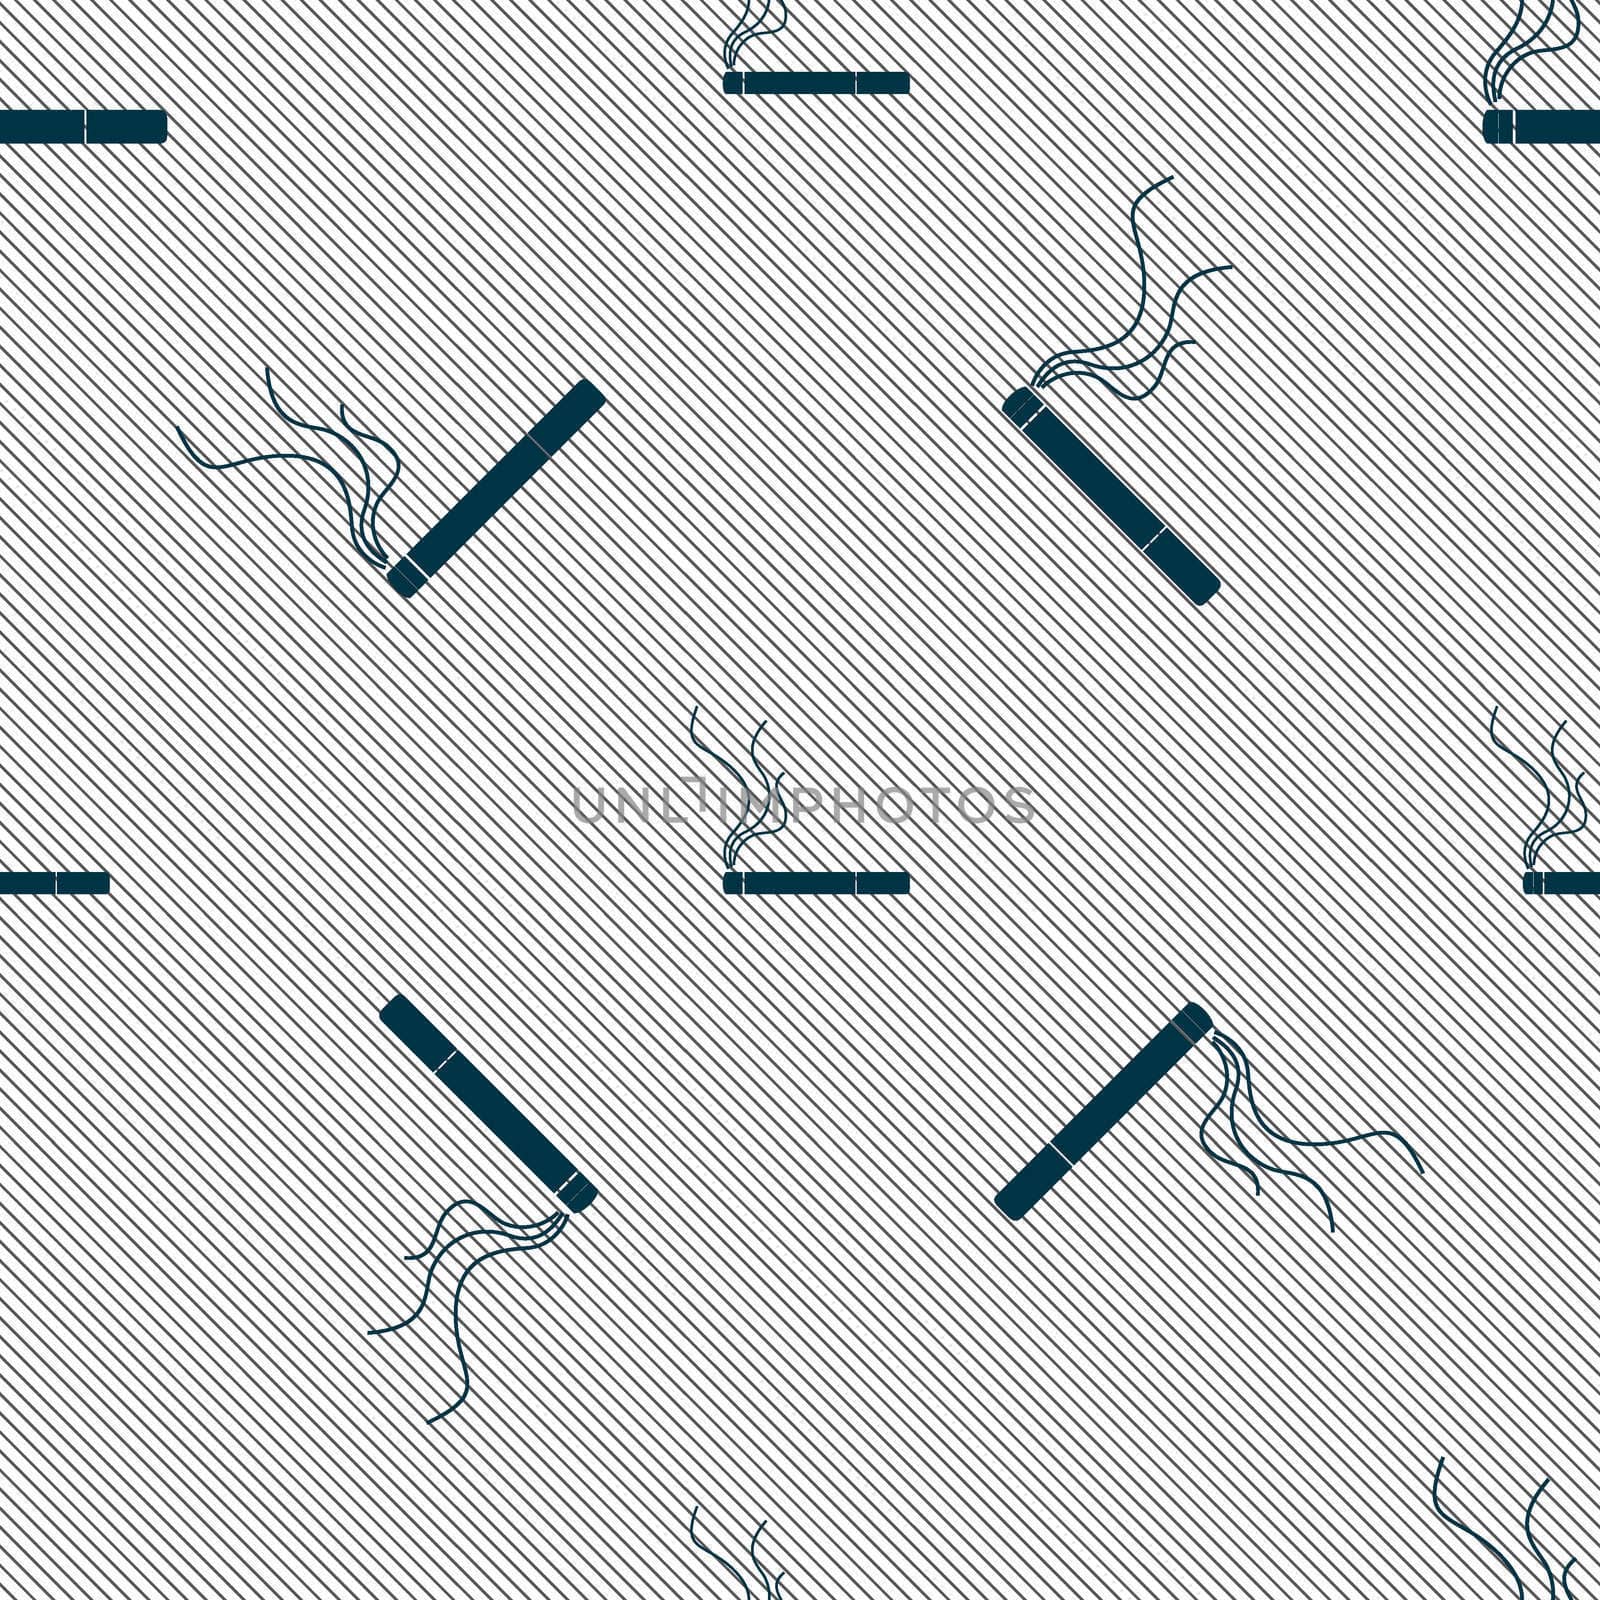 Smoking sign icon. Cigarette symbol. Seamless pattern with geometric texture. illustration